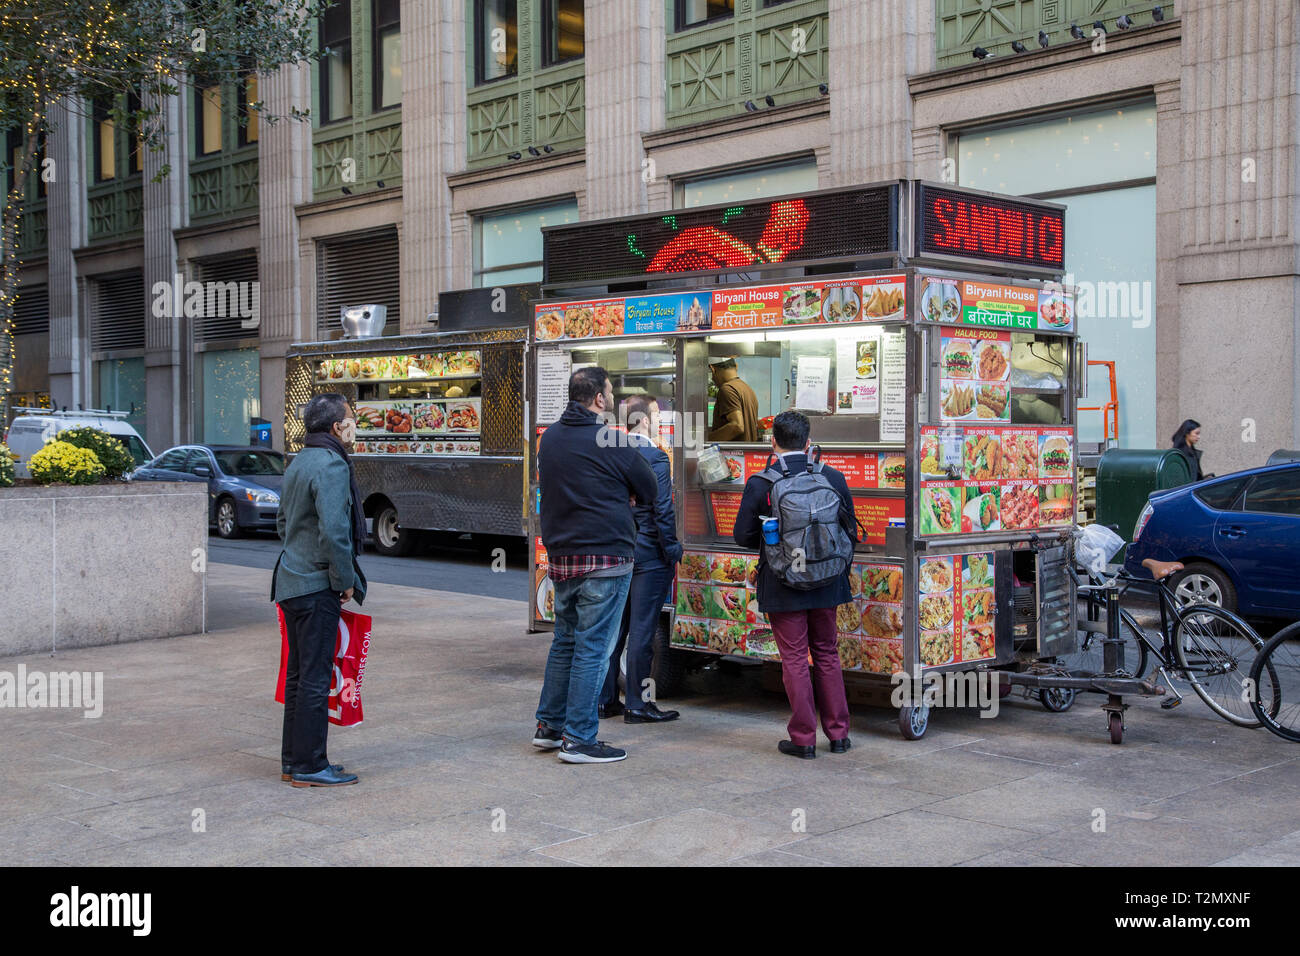 New York, United States of America - November 18, 2016: People ordering food at a street food stall in Lower Manhattan. Stock Photo